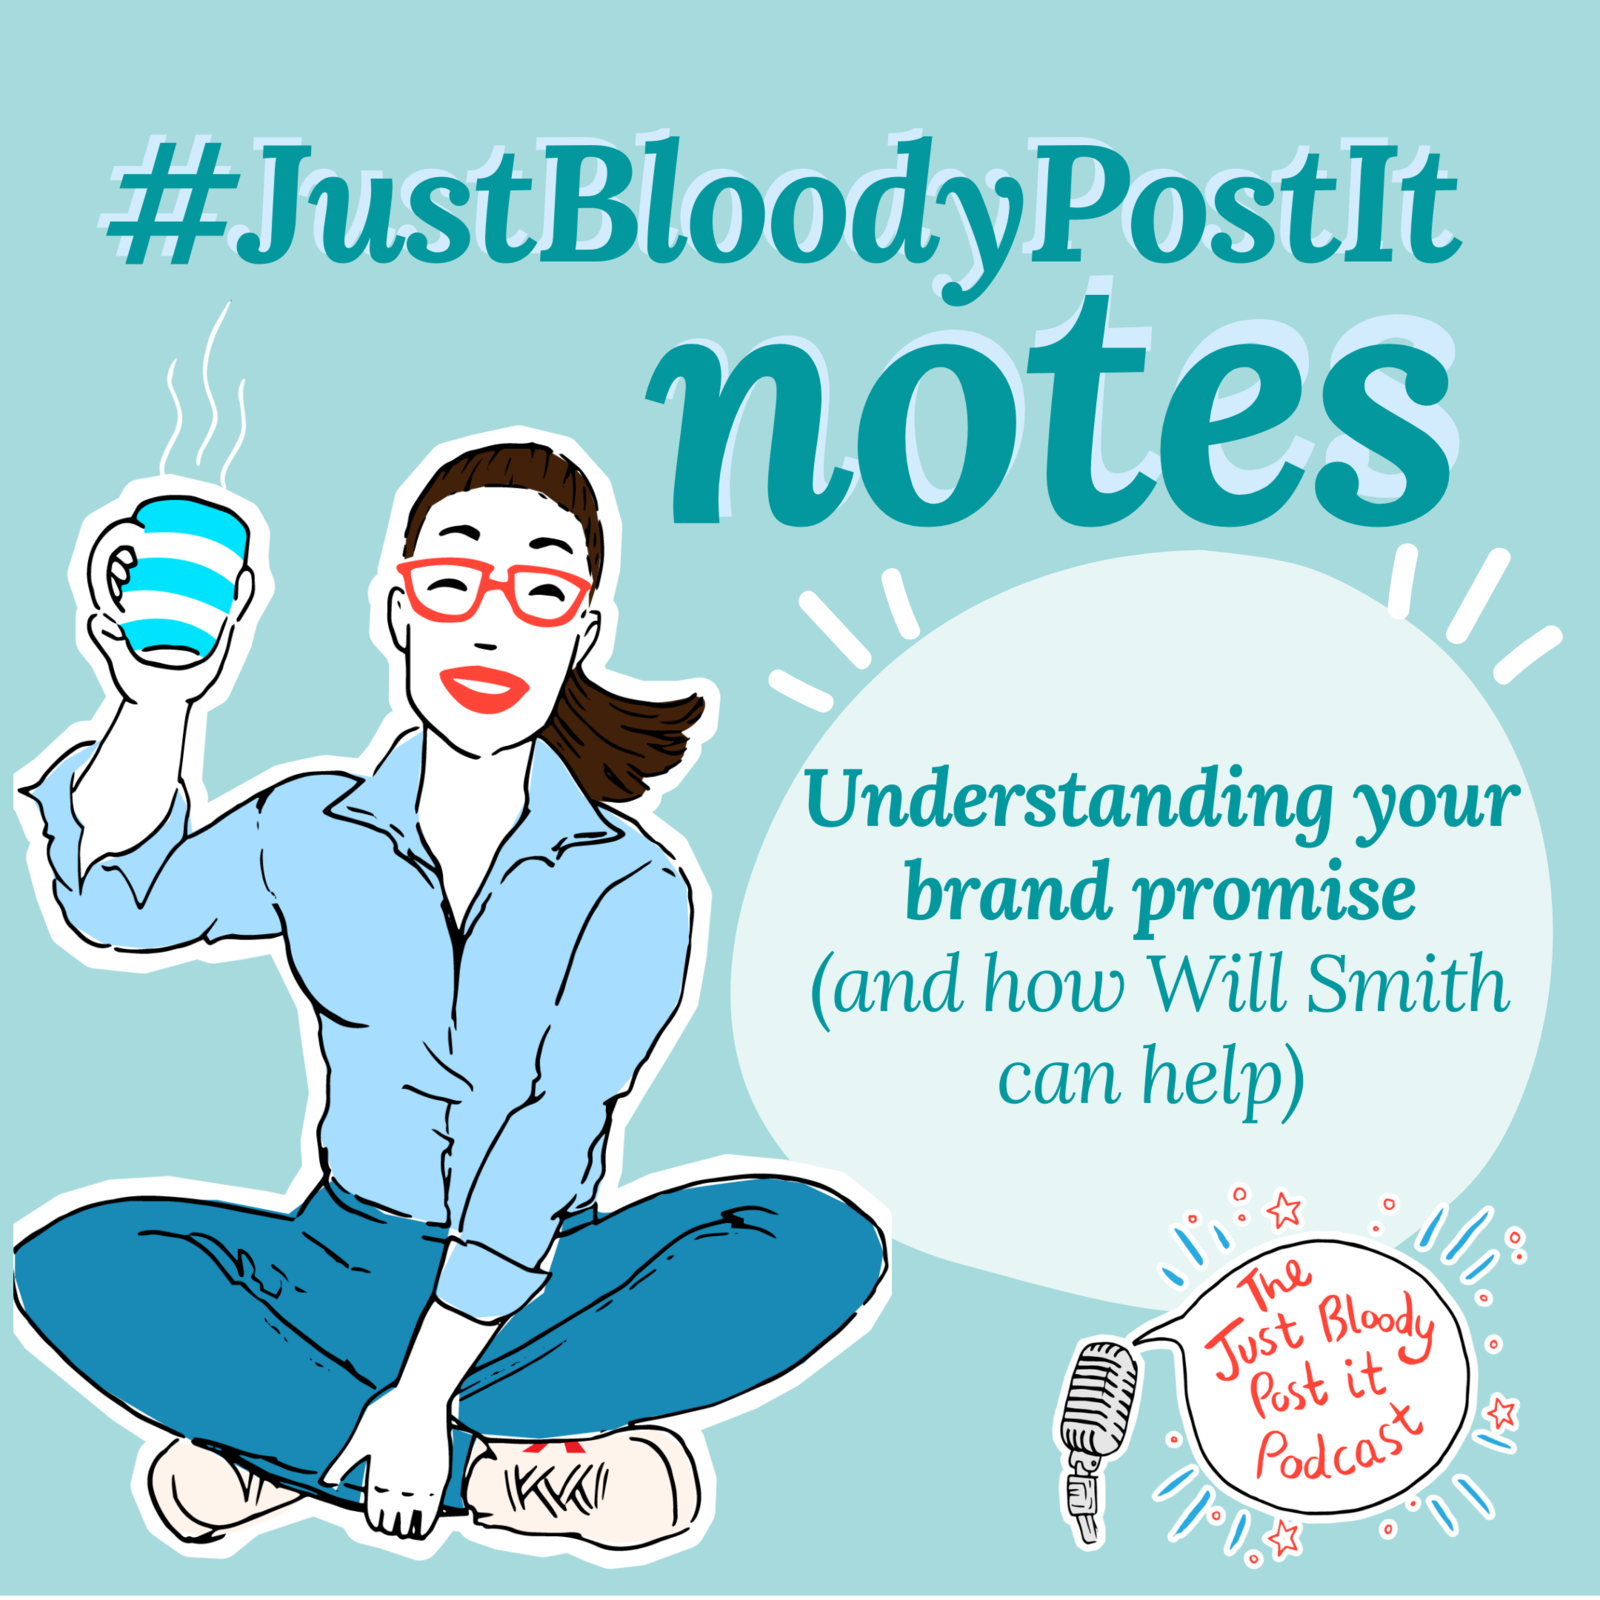 S3 Ep58: Your brand promise (and Will Smith) a #JustBloodyPostIt Note